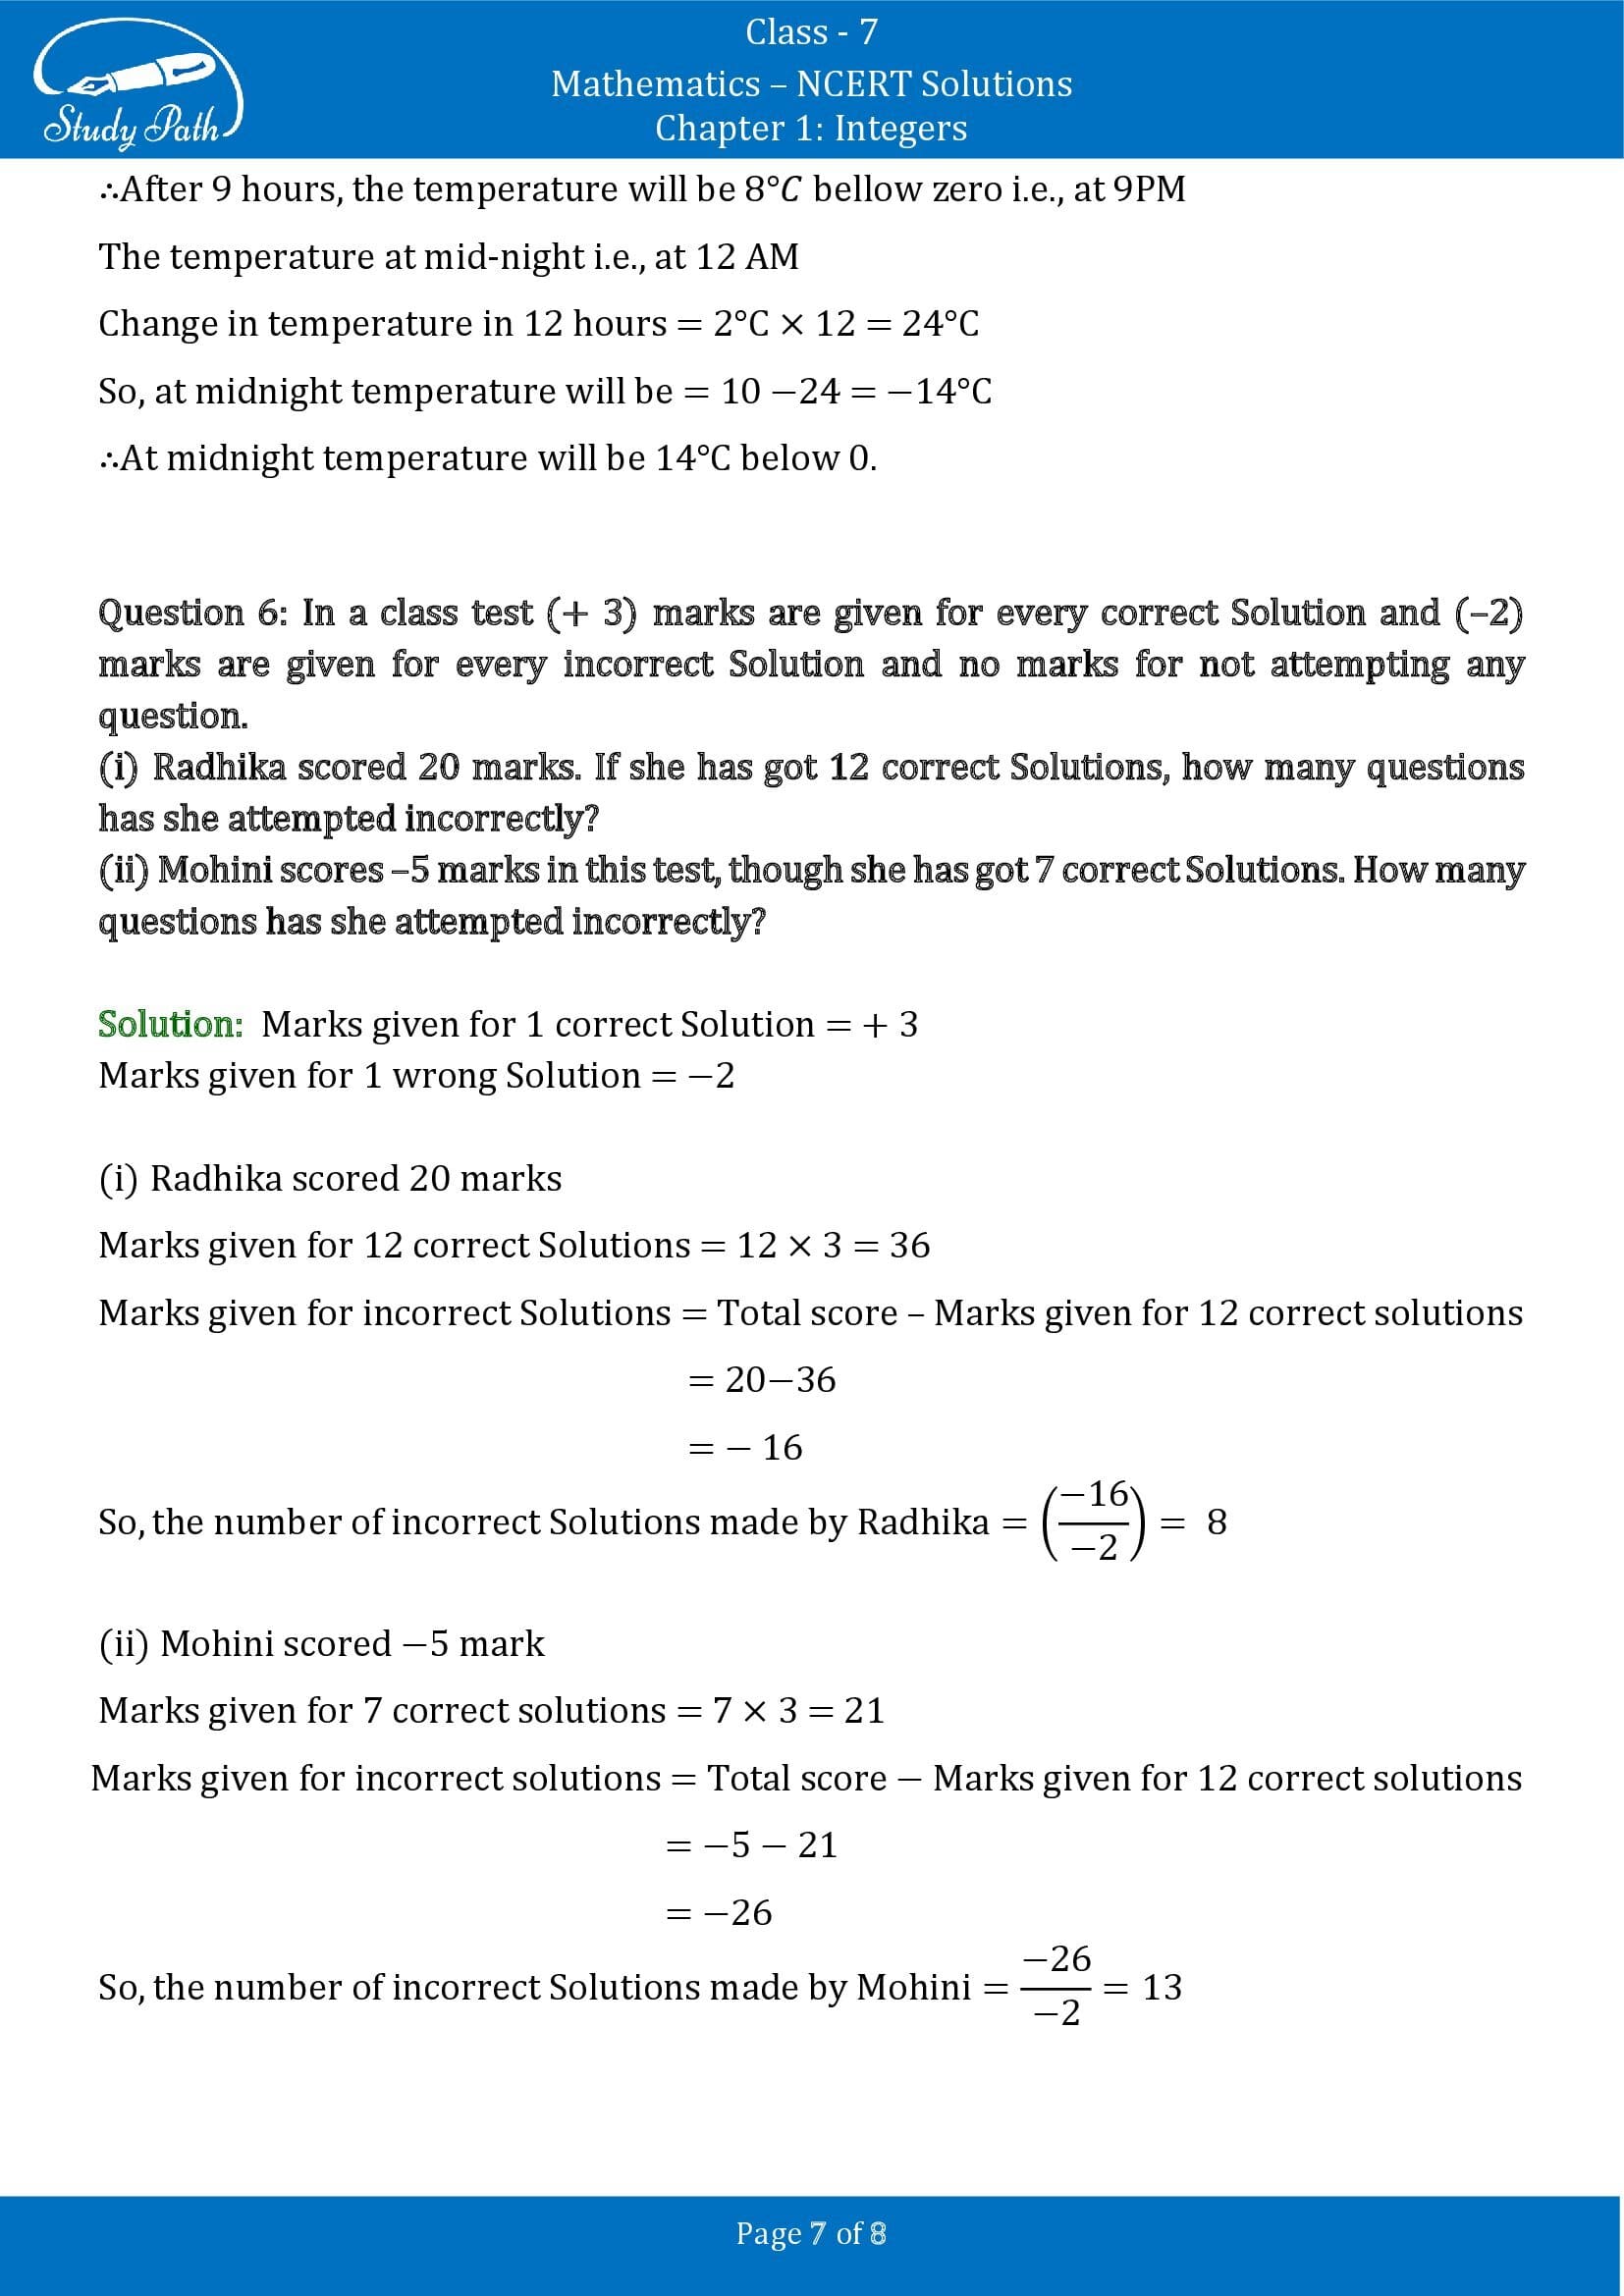 NCERT Solutions for Class 7 Maths Chapter 1 Integers Exercise 1.4 00007